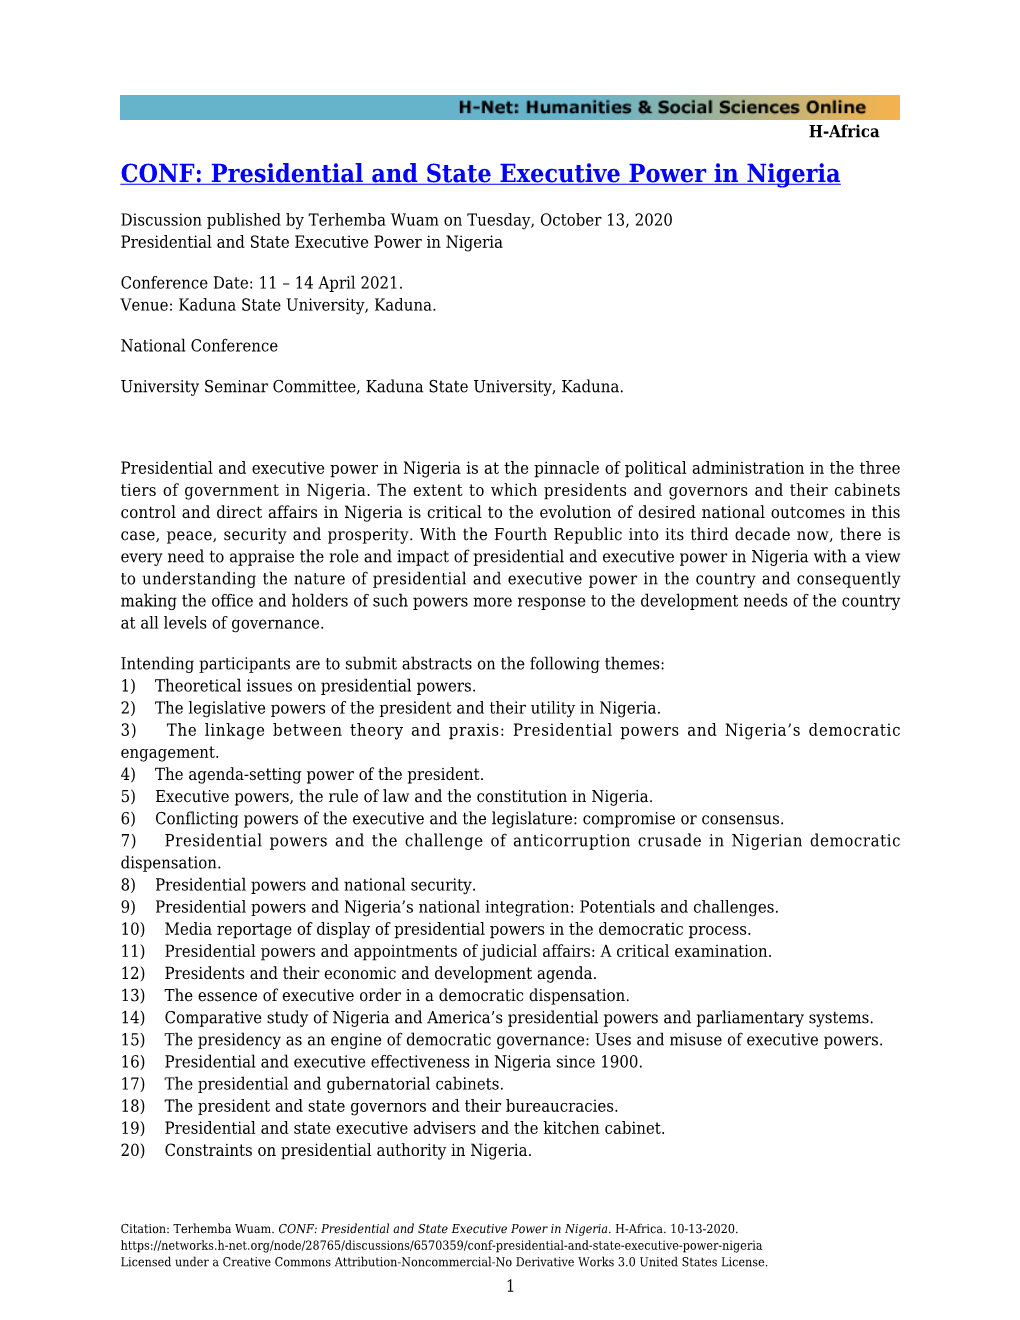 Presidential and State Executive Power in Nigeria